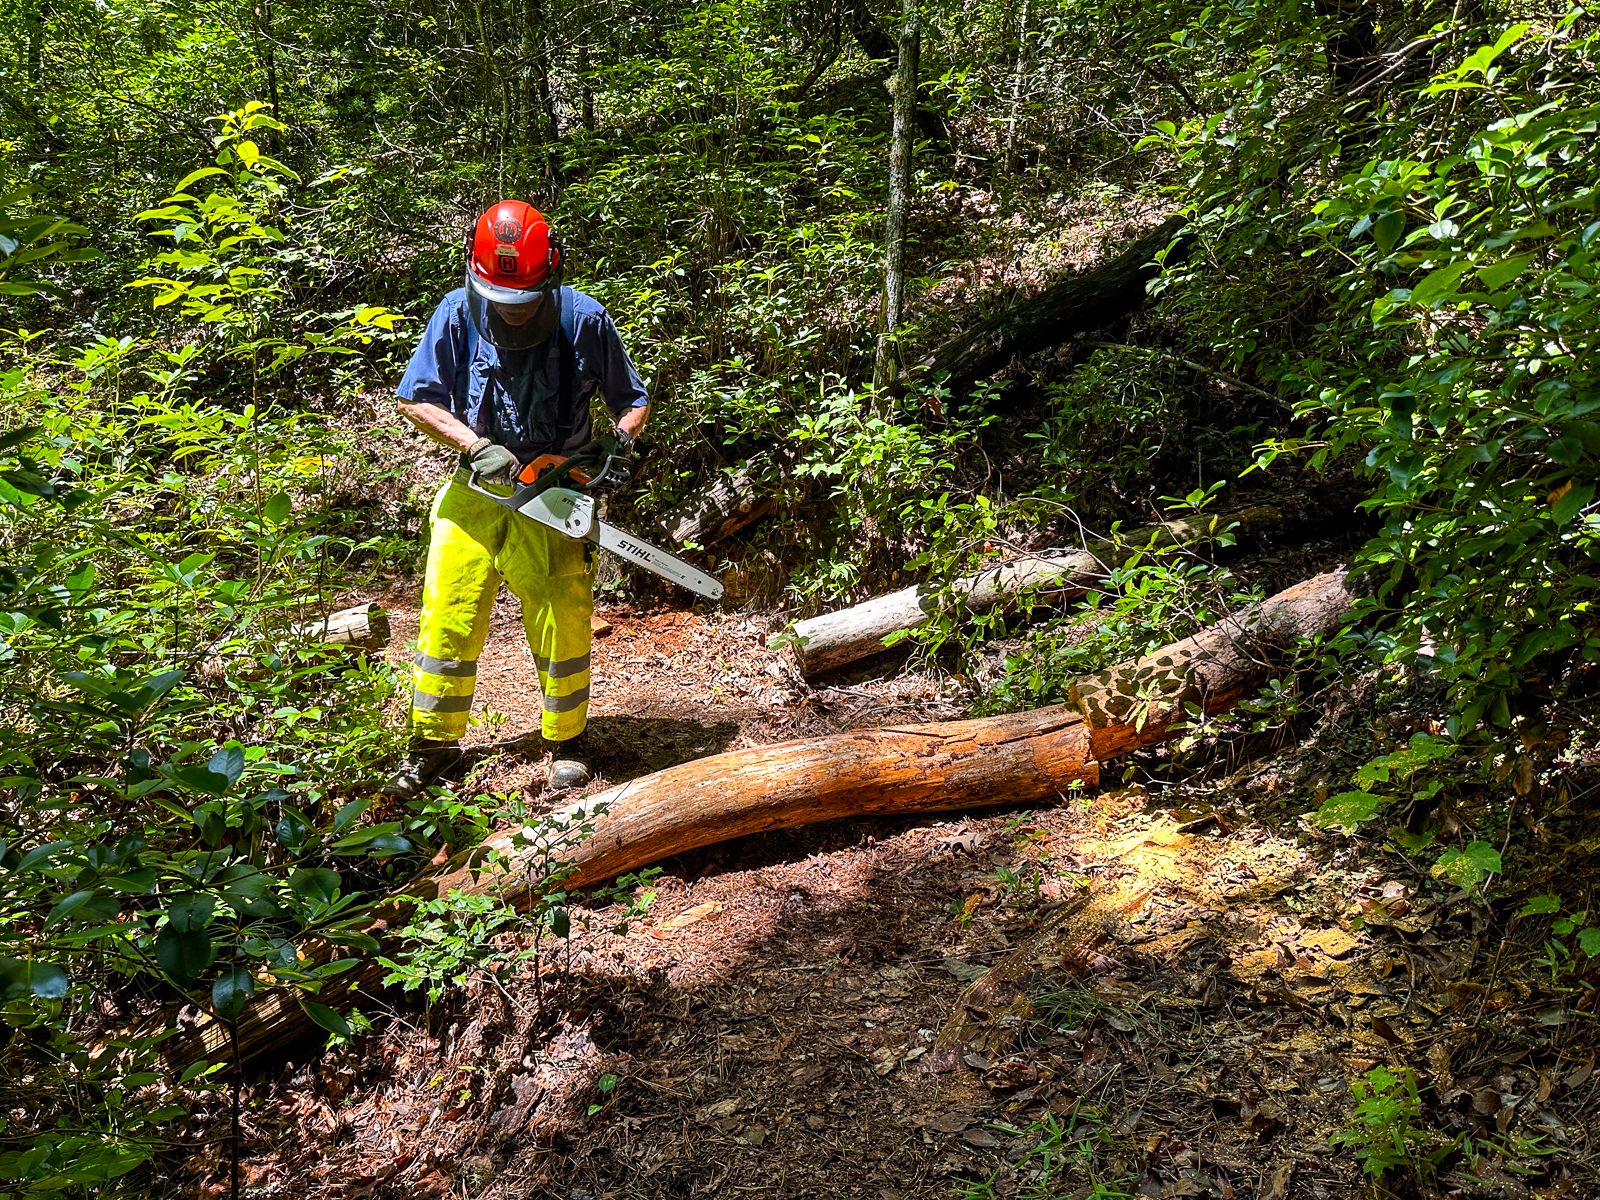 Volunteer Ross sizing up a blowdown on the trail